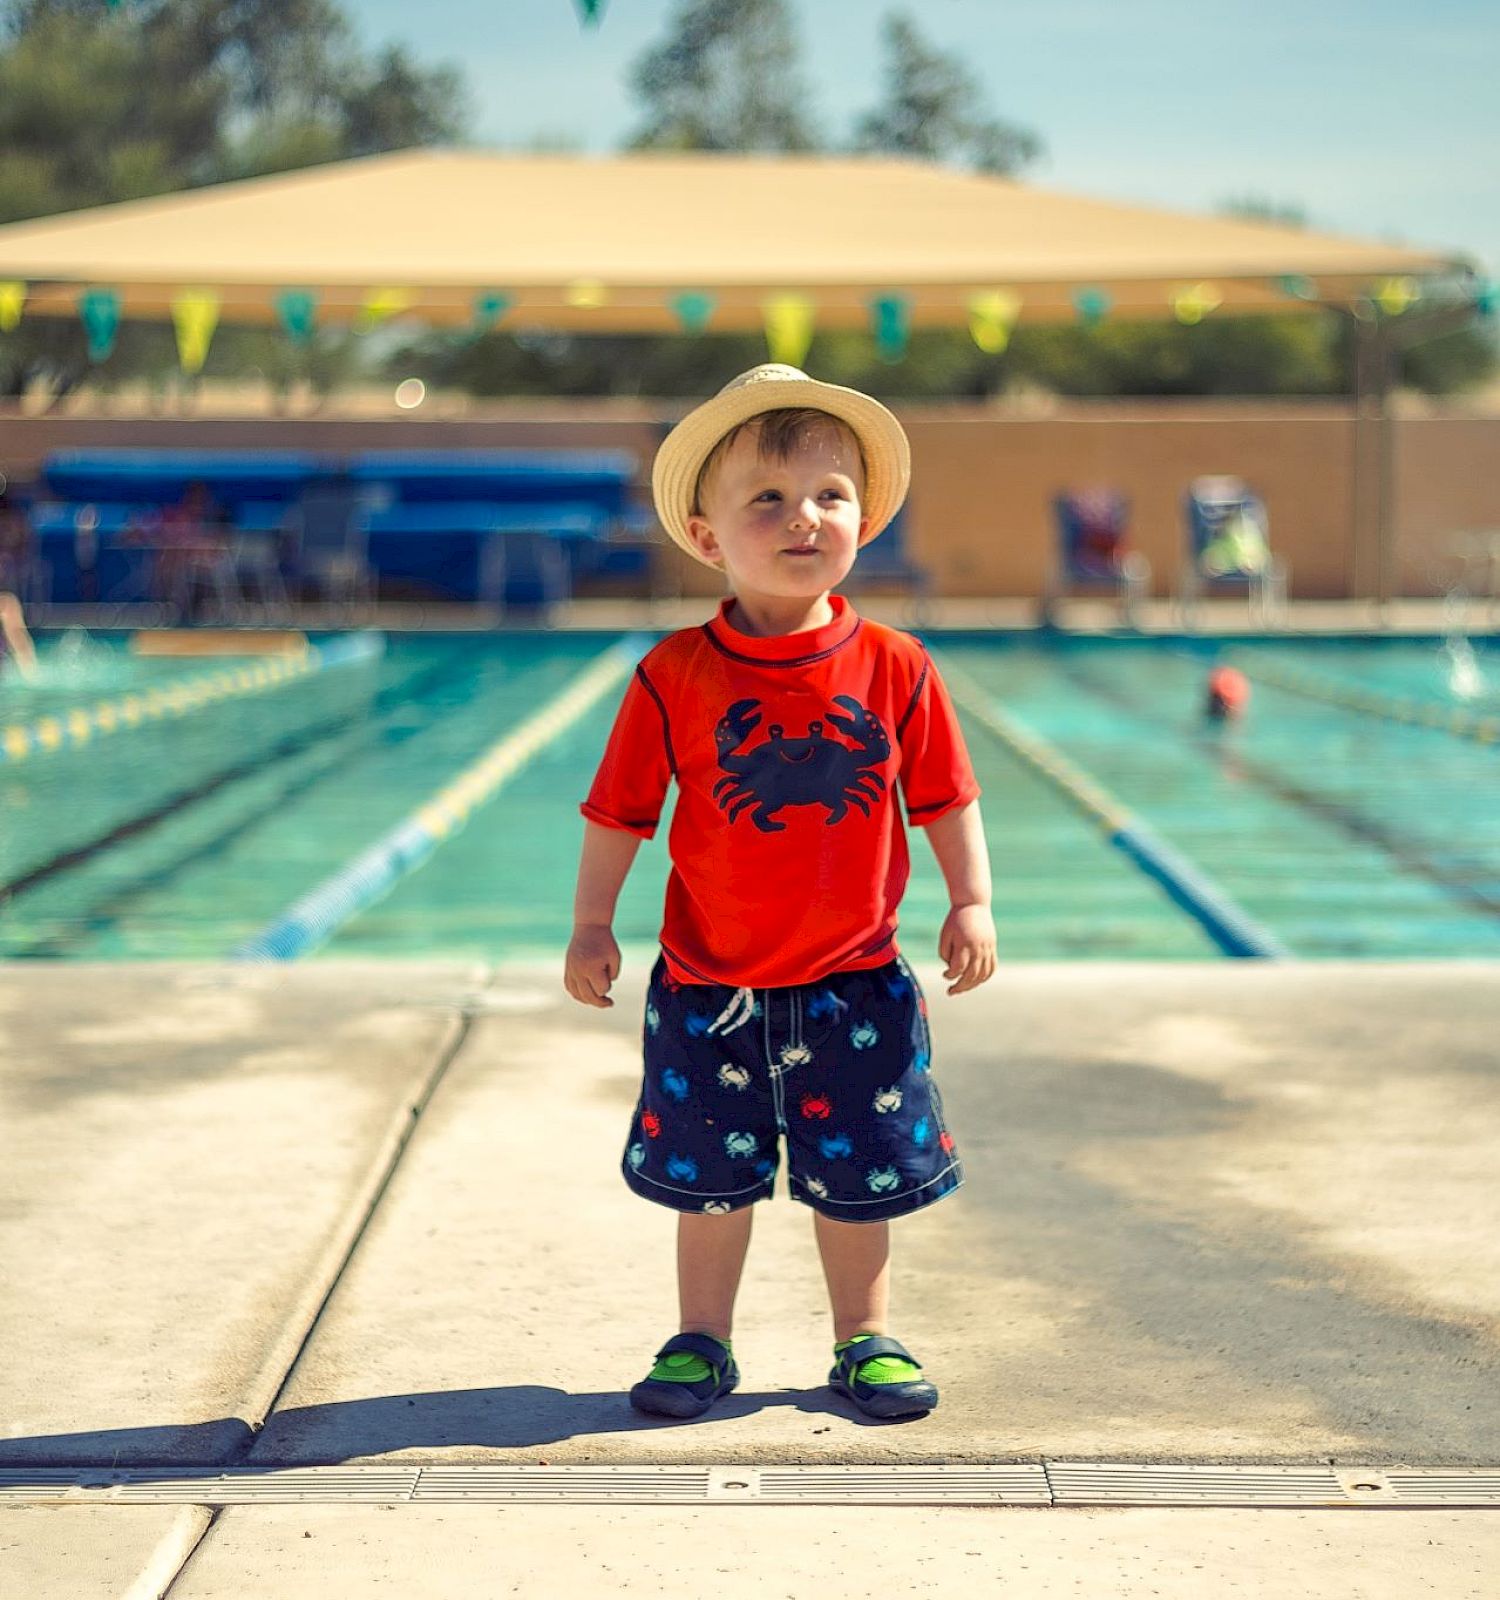 A young child in a red shirt and hat stands confidently by a swimming pool, with people and greenery in the background.